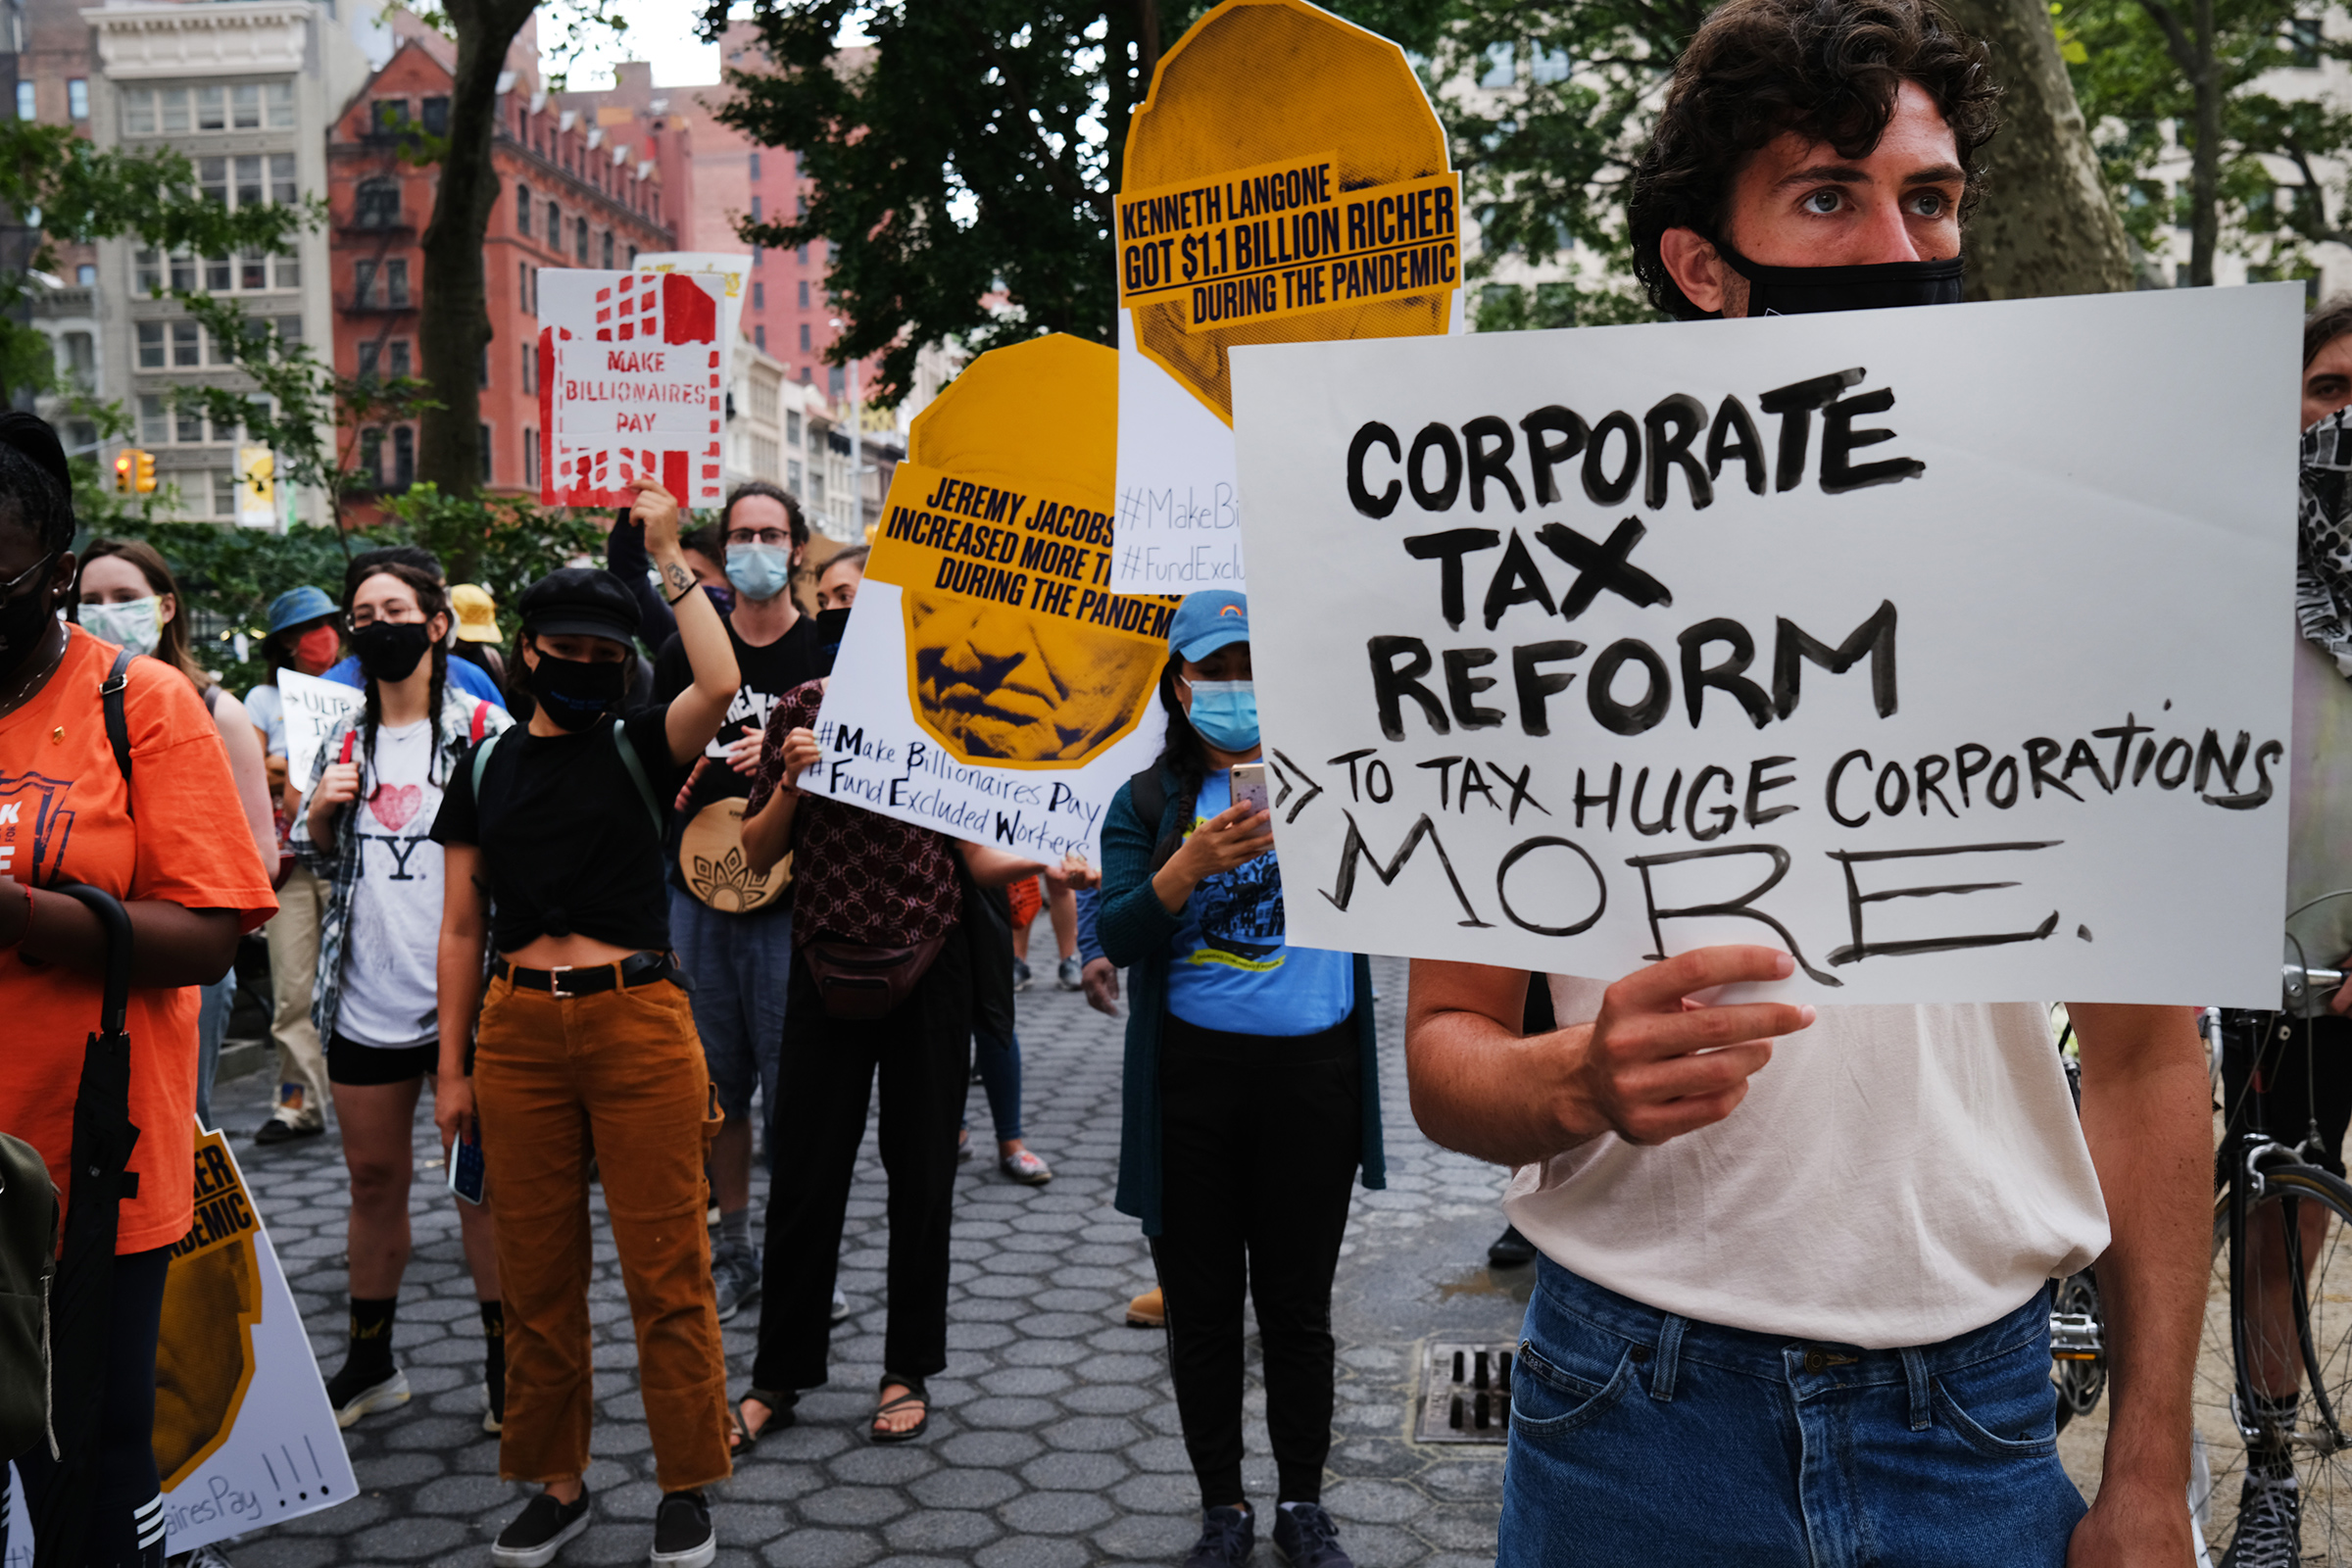 People participate in a "March on Billionaires" event on July 17 in New York City. The march called on Governor Andrew Cuomo to pass a tax on billionaires and to fund workers excluded from unemployment and federal aid programs (Spencer Platt—Getty Images)